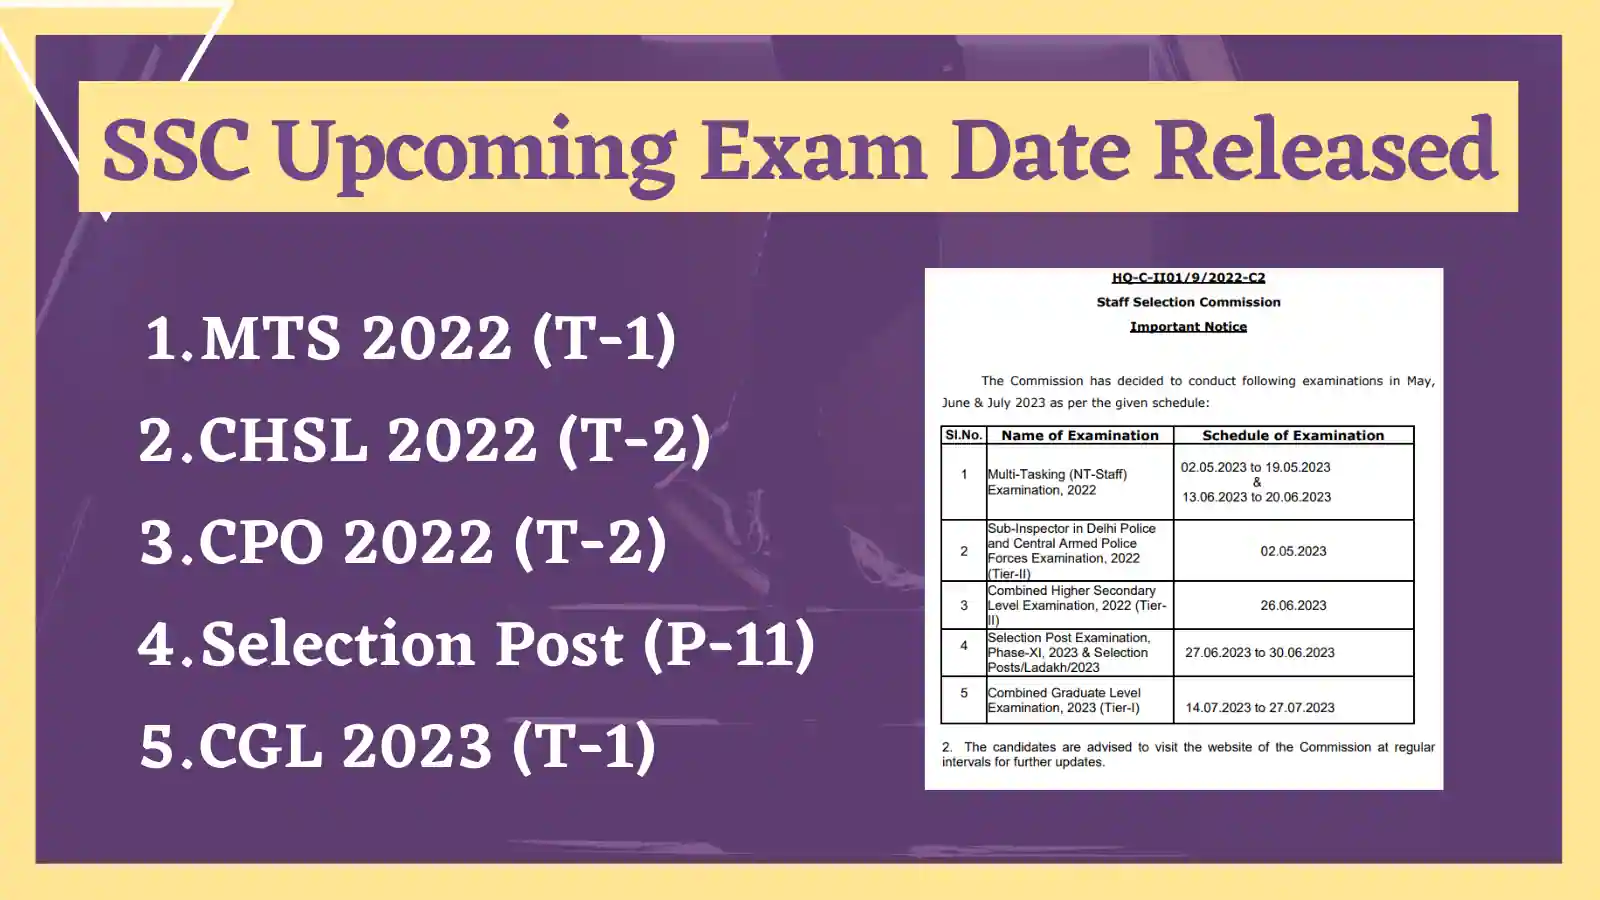 SSC UPCOMING EXAM DATE RELEASED